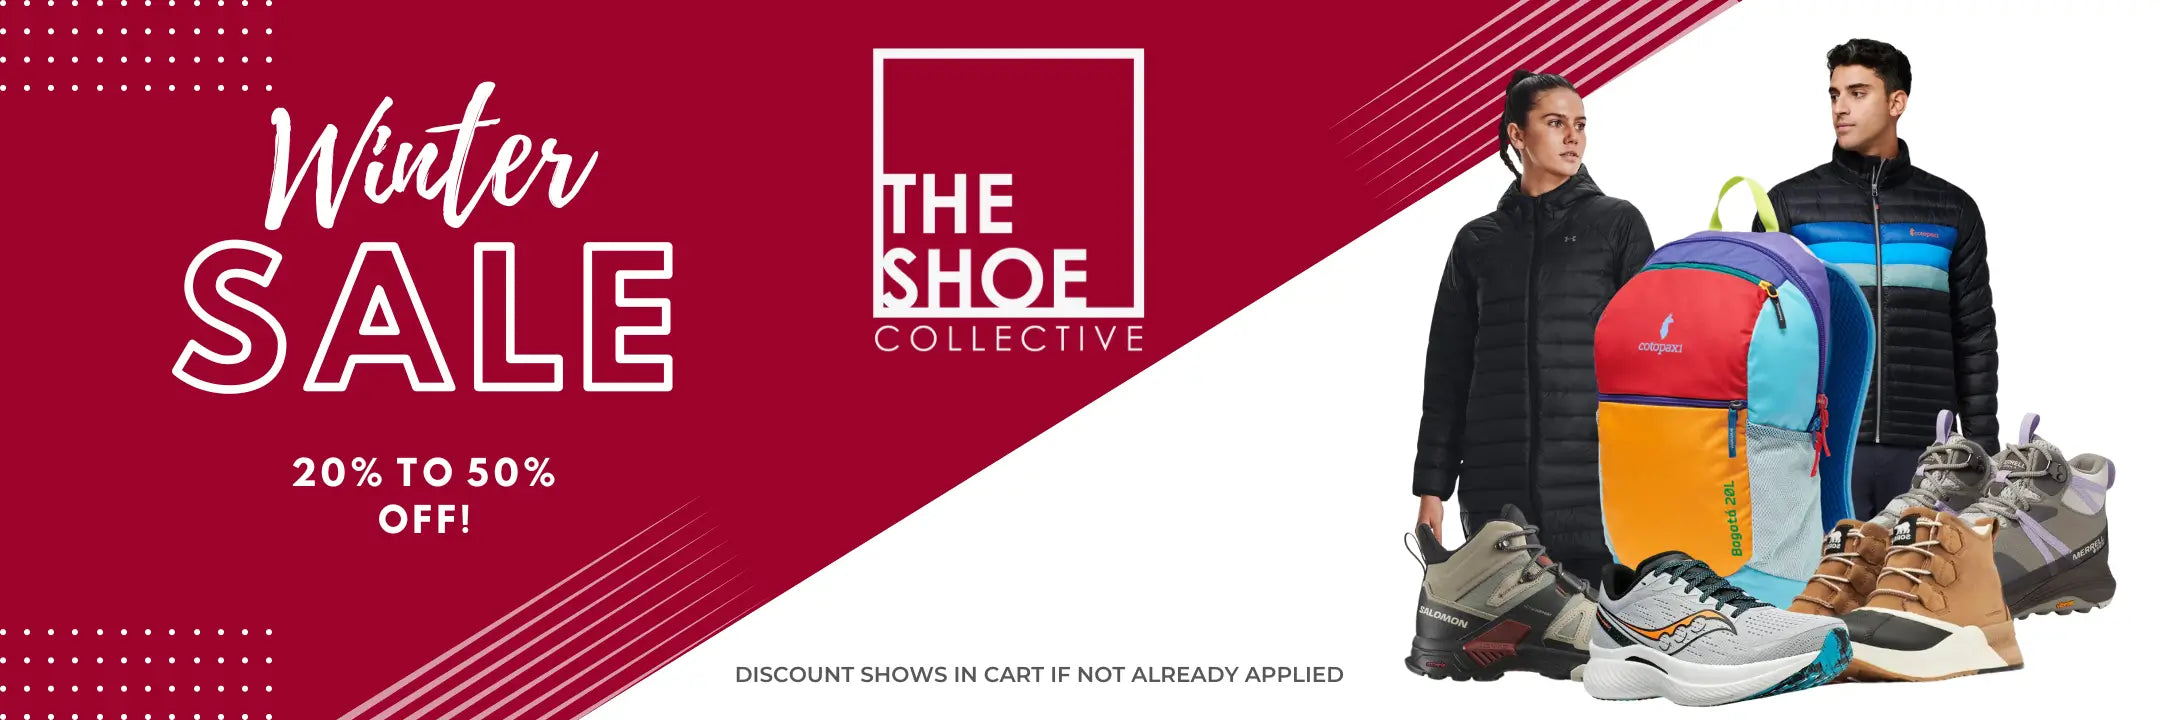 Winter sale at theshoecollective.com